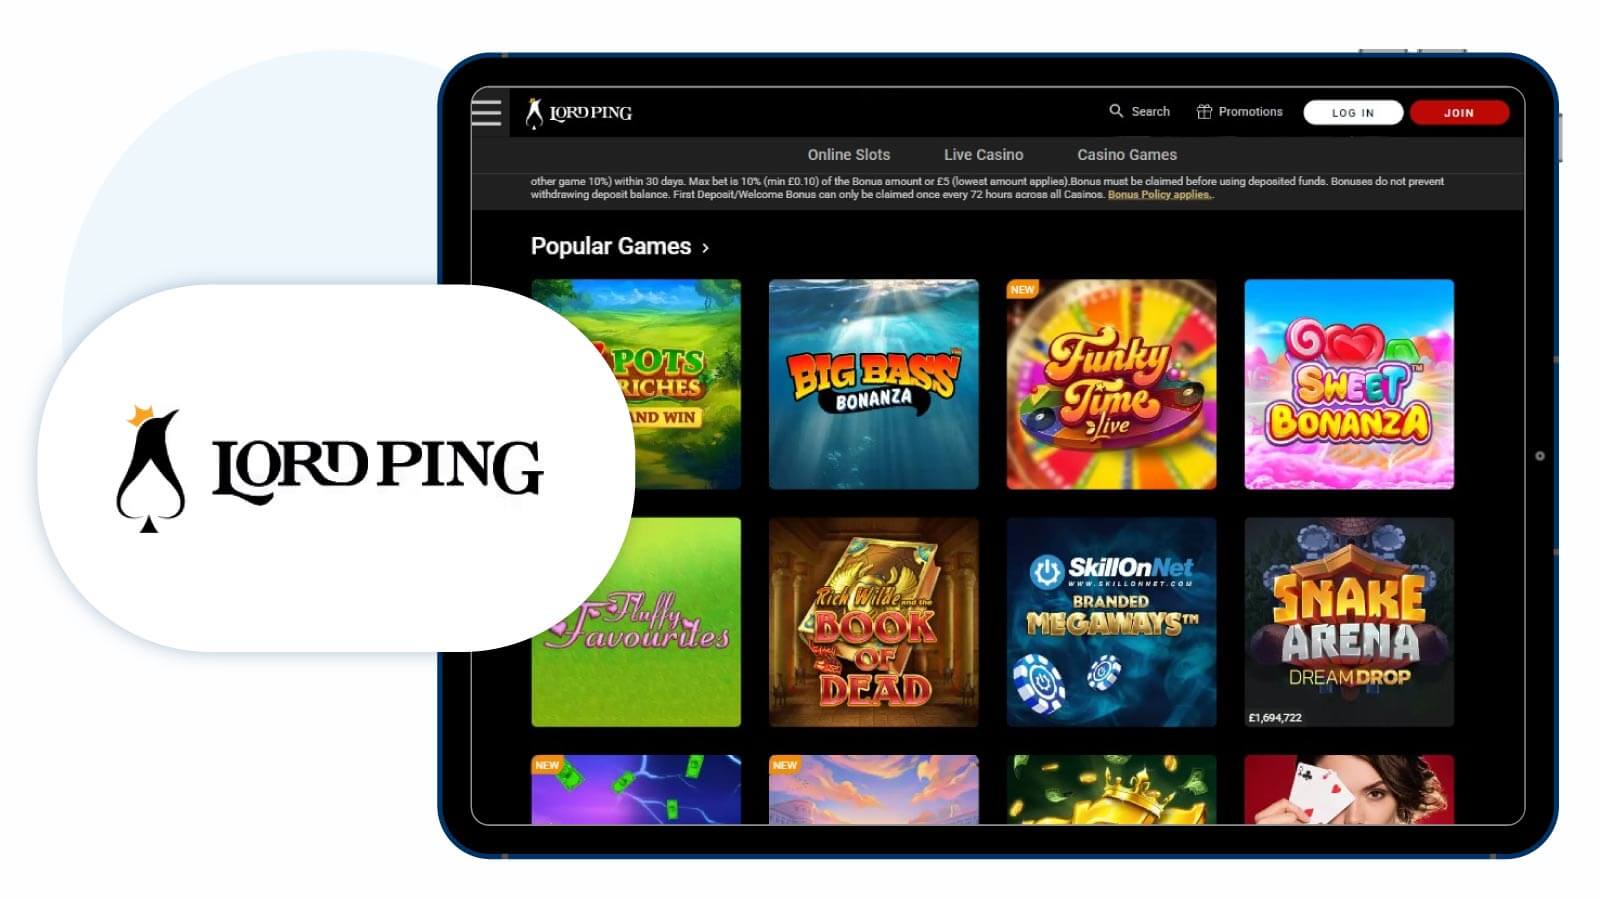 Lord Ping Casino – Best Barcrest Casino for Slots